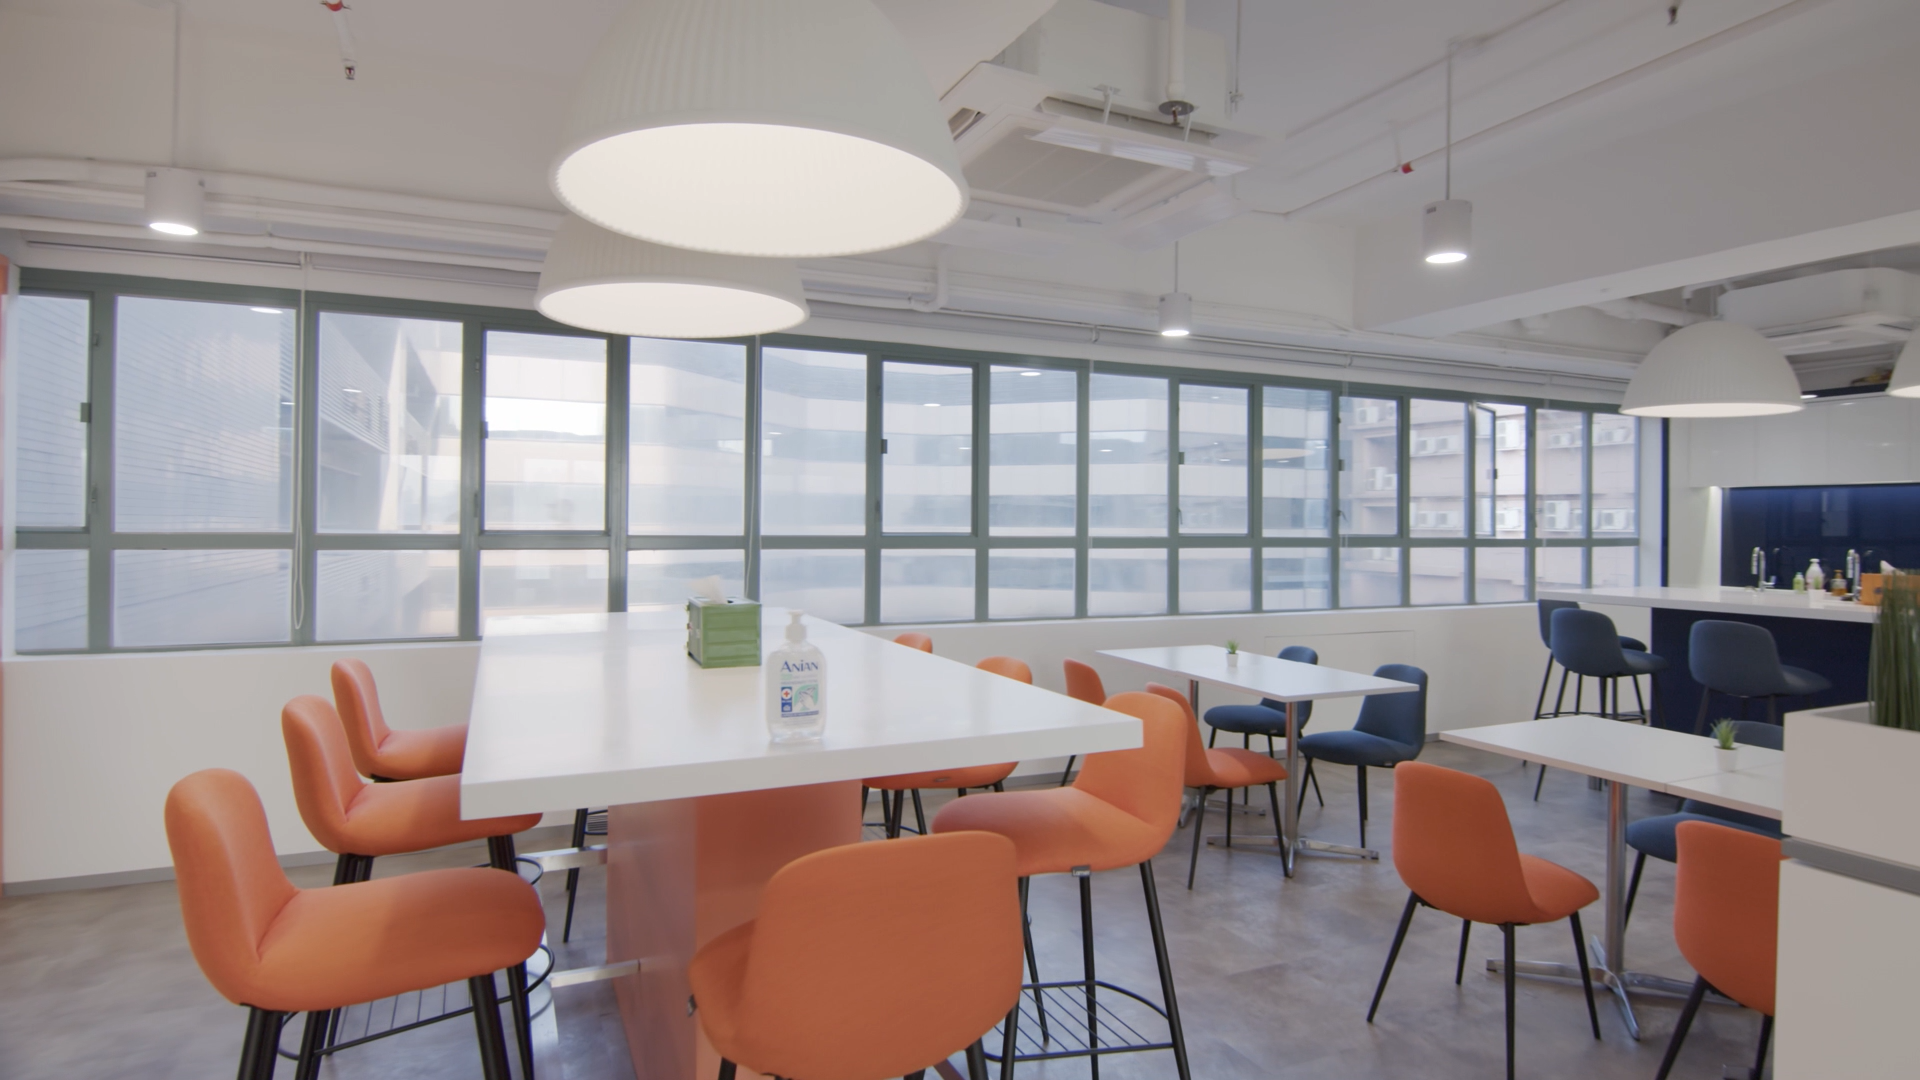  Ryan said he personally appreciated the concept of smart office, “It’s not only focused on technology implementation and modernized decoration, but also responds to employees' requirements for the working environment, which will have a positive impact on enhancing the sense of belonging and productivity.”